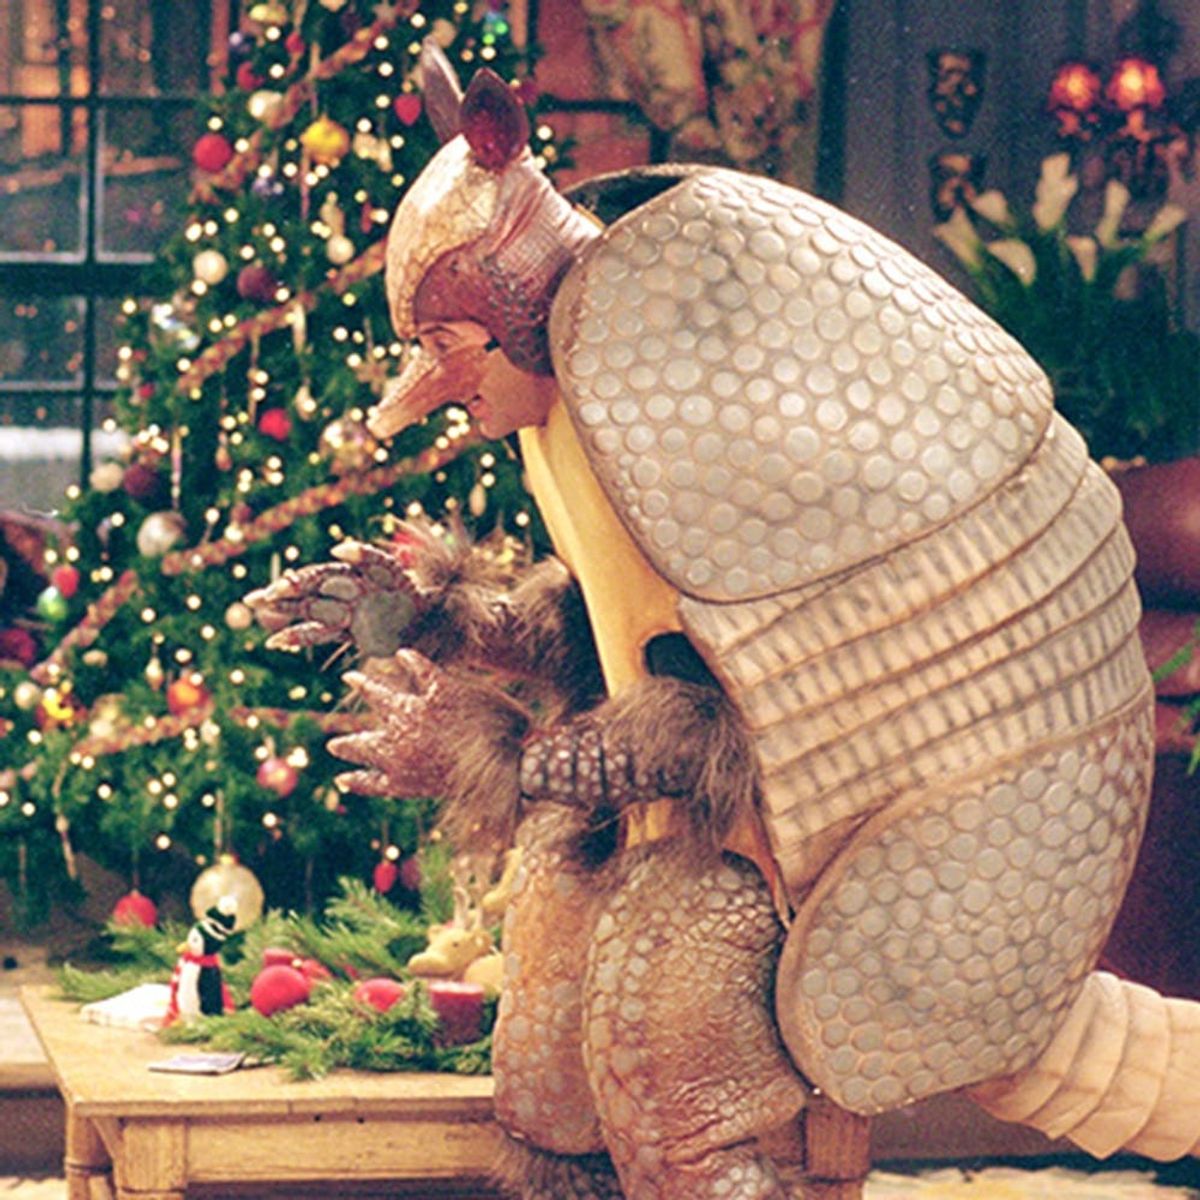 The 7 Iconic Christmas Episodes to Stream This Week